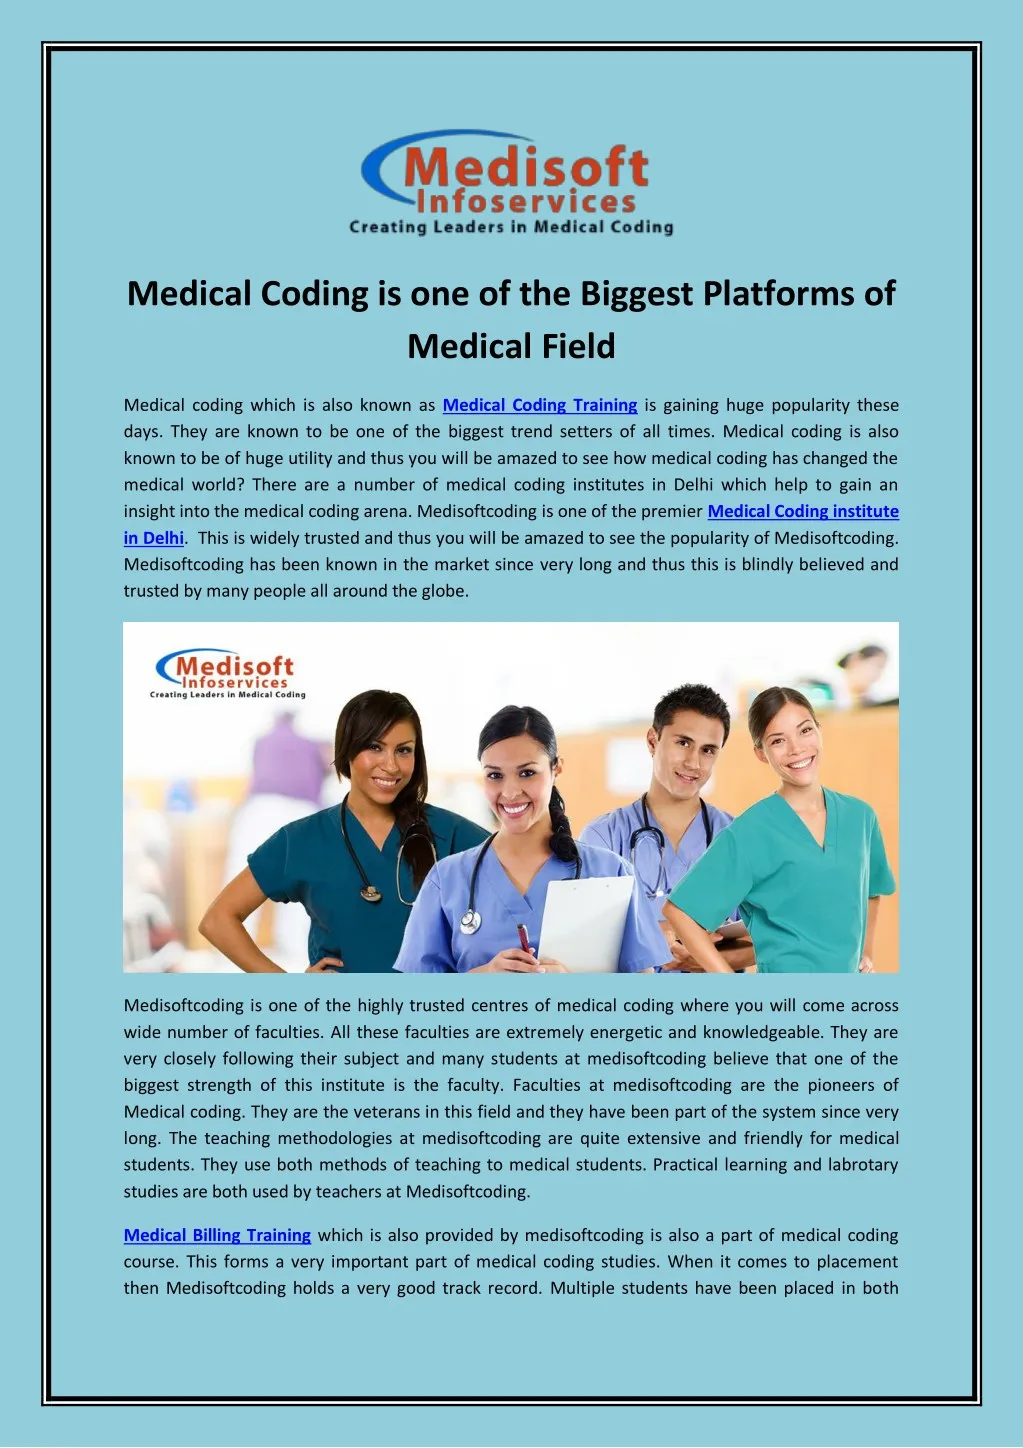 medical coding is one of the biggest platforms